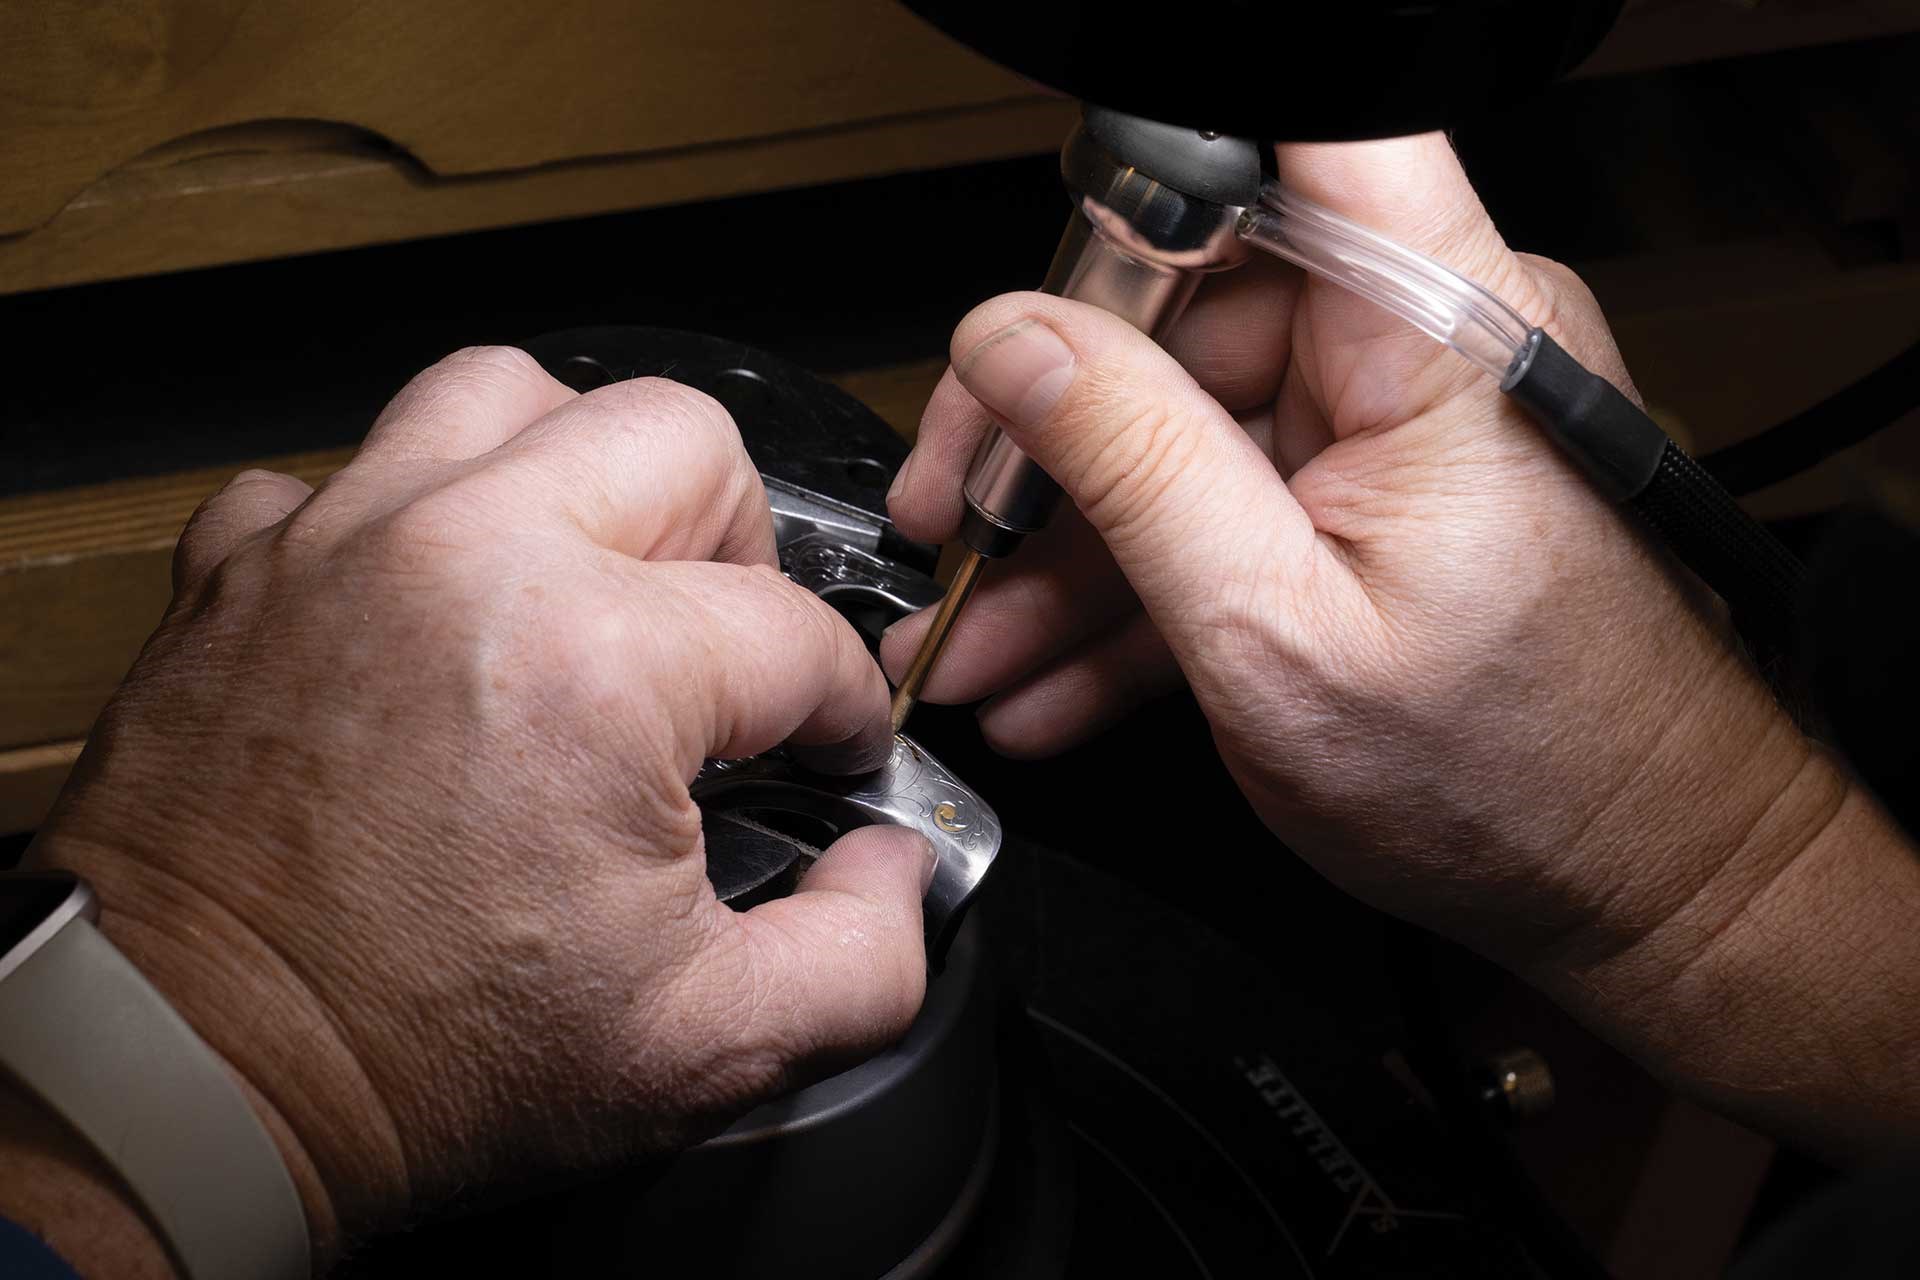 A man uses a specialized tool to engrave a firearm component.